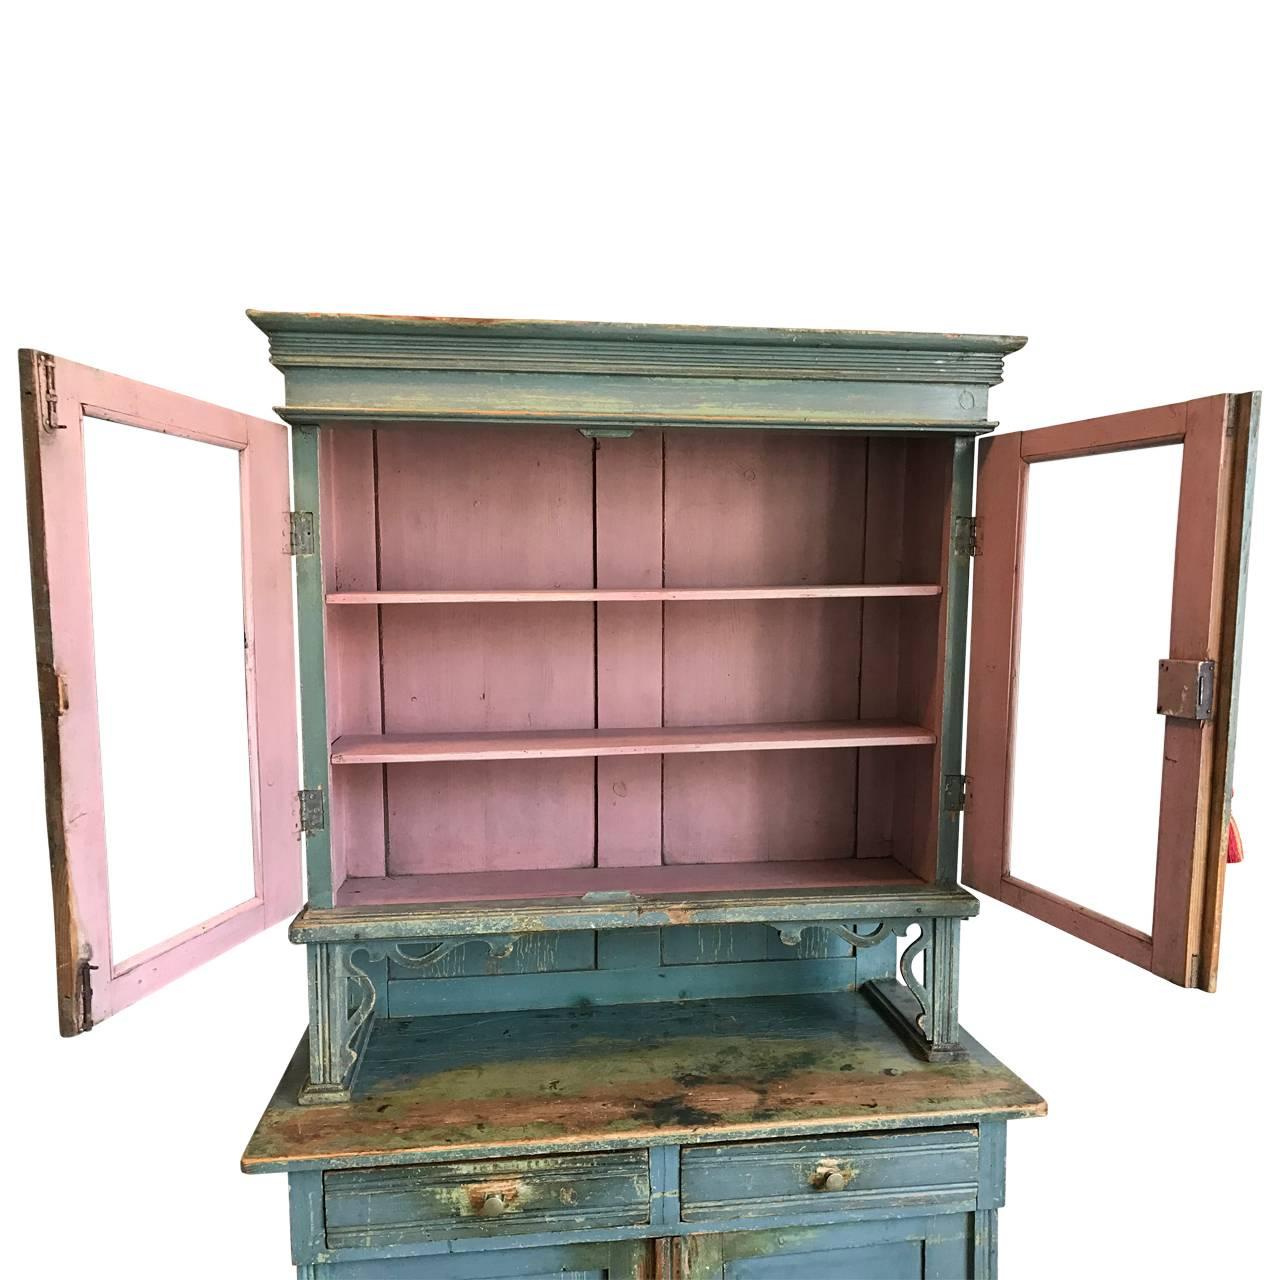 Period cabinet with glass top doors and two shelves in each of the top and bottom section. Original hardware and keys.

$125 flat rate front door delivery includes Washington DC metro, Baltimore and Philadelphia